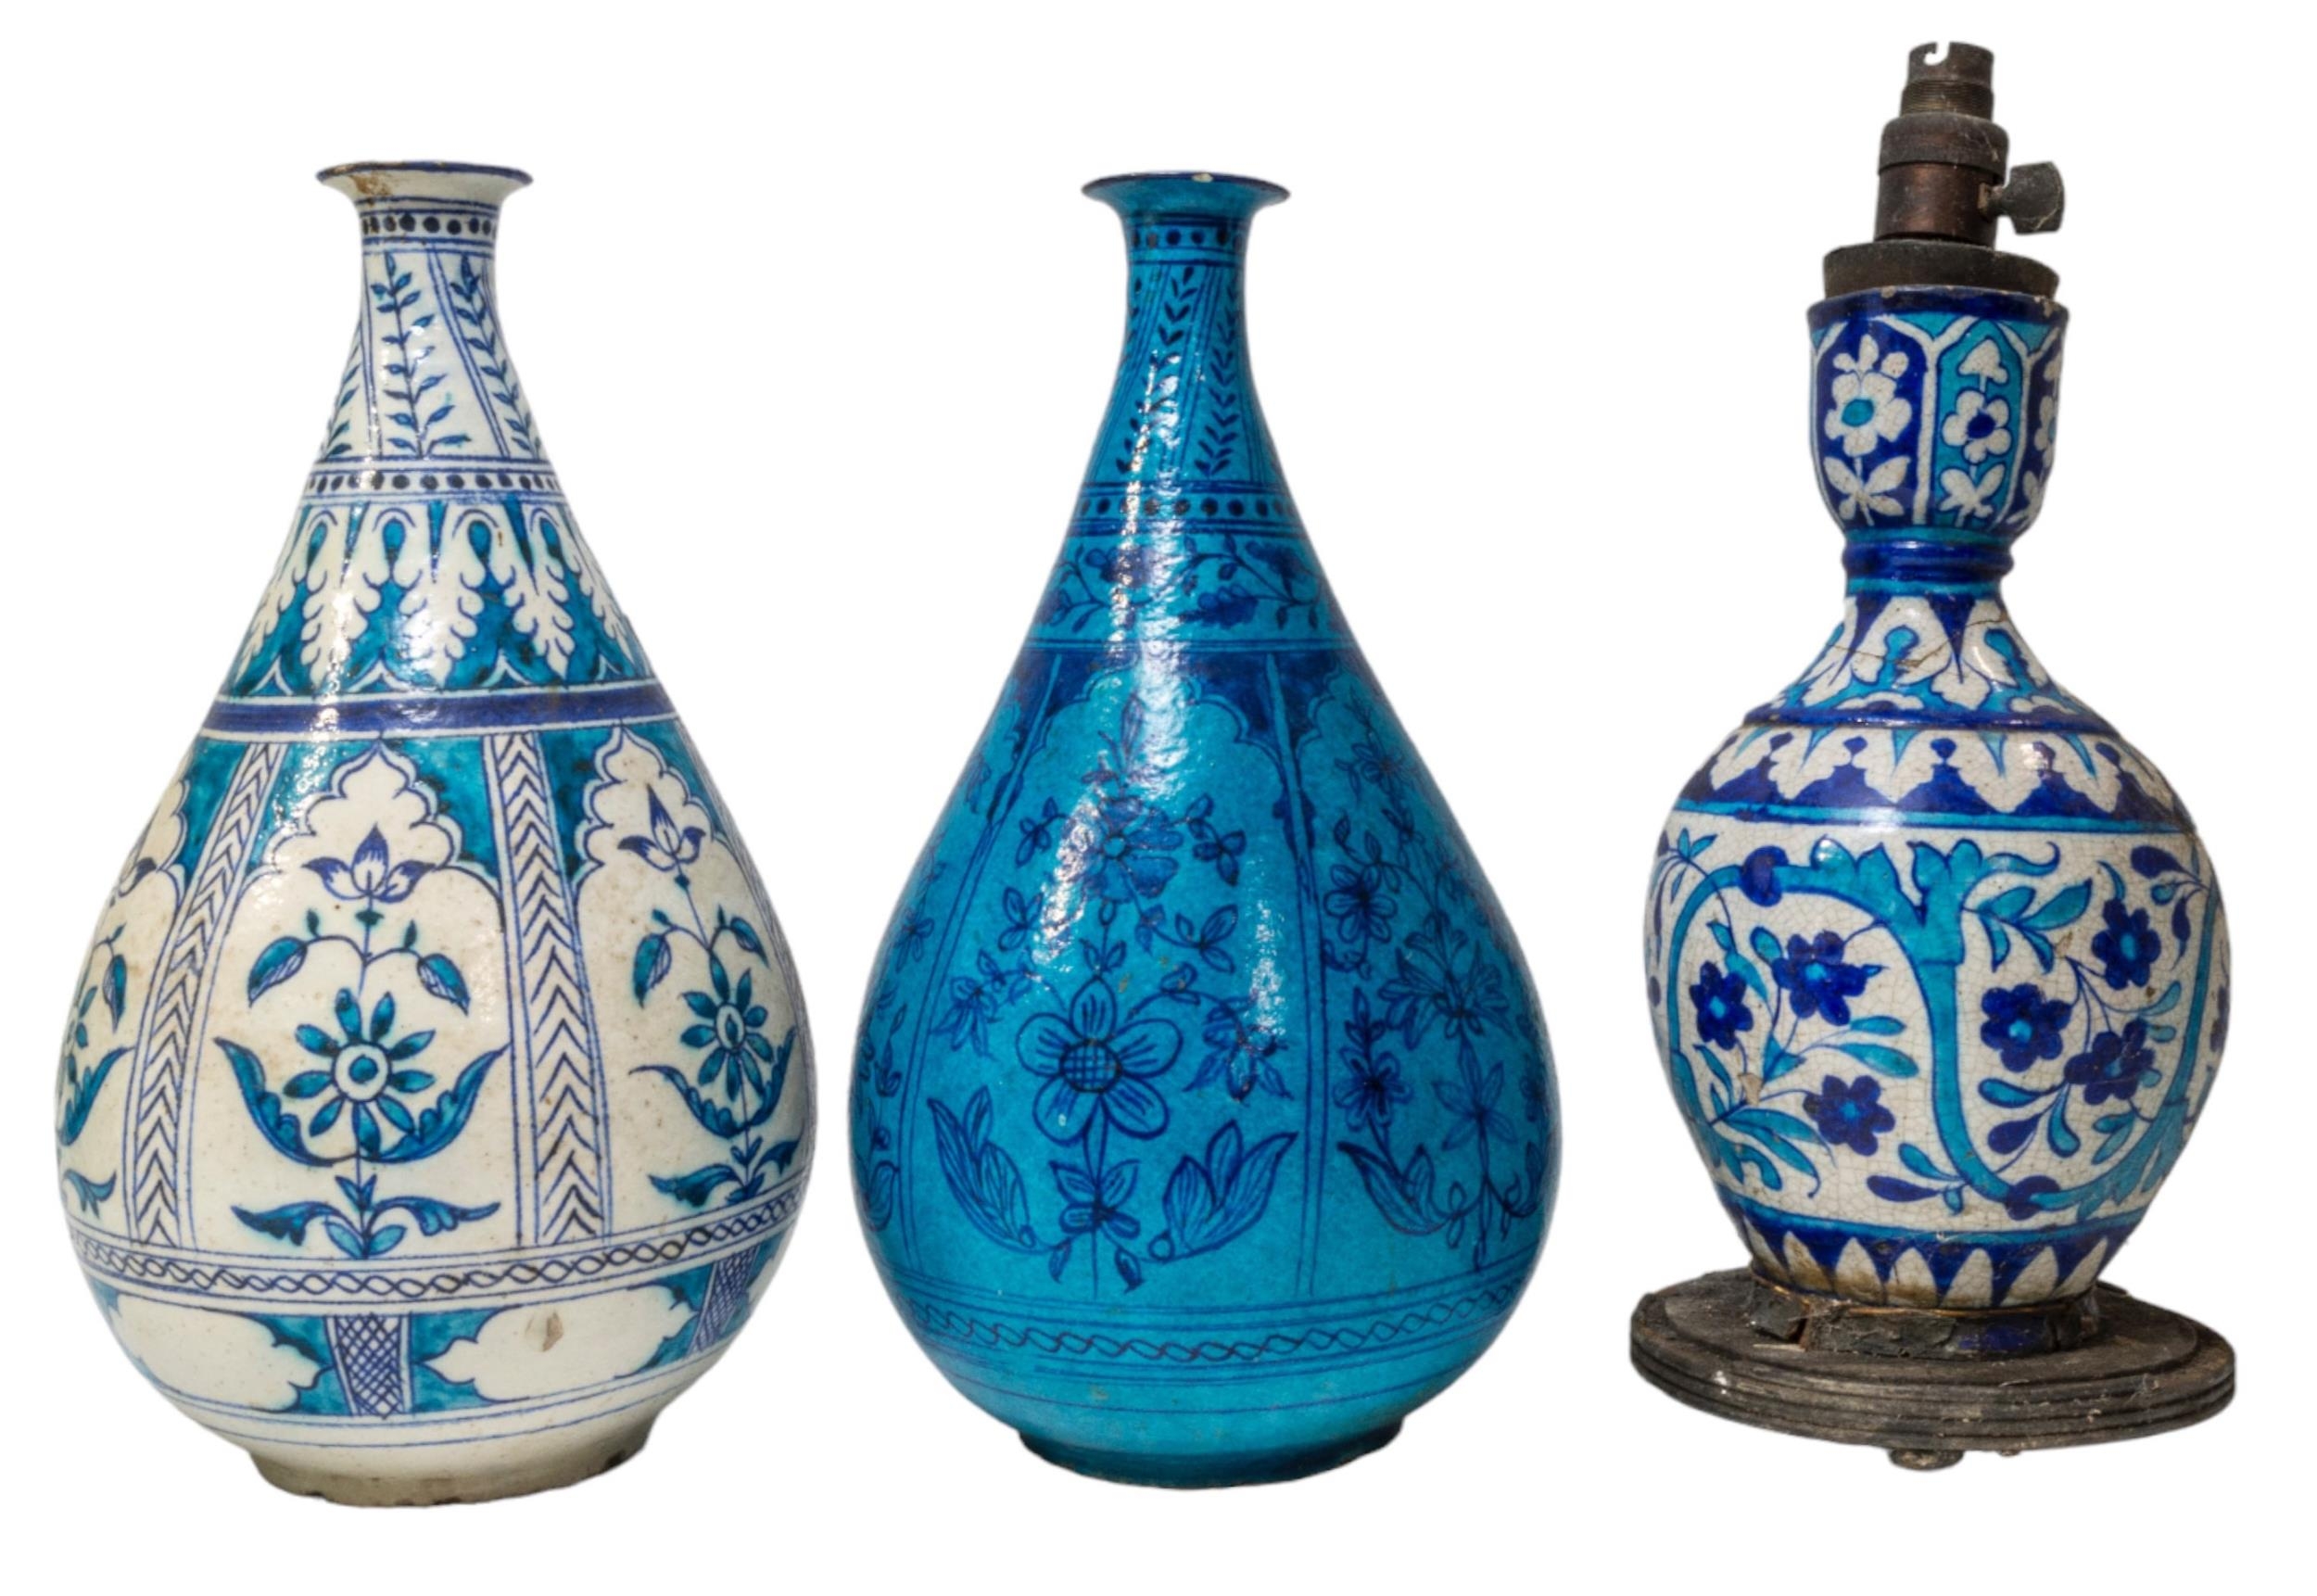 THREE ISNIK STYLE BOTTLE VASES, PERSIAN/NEAR EASTERN, 19TH CENTURY, two of large drop form, the